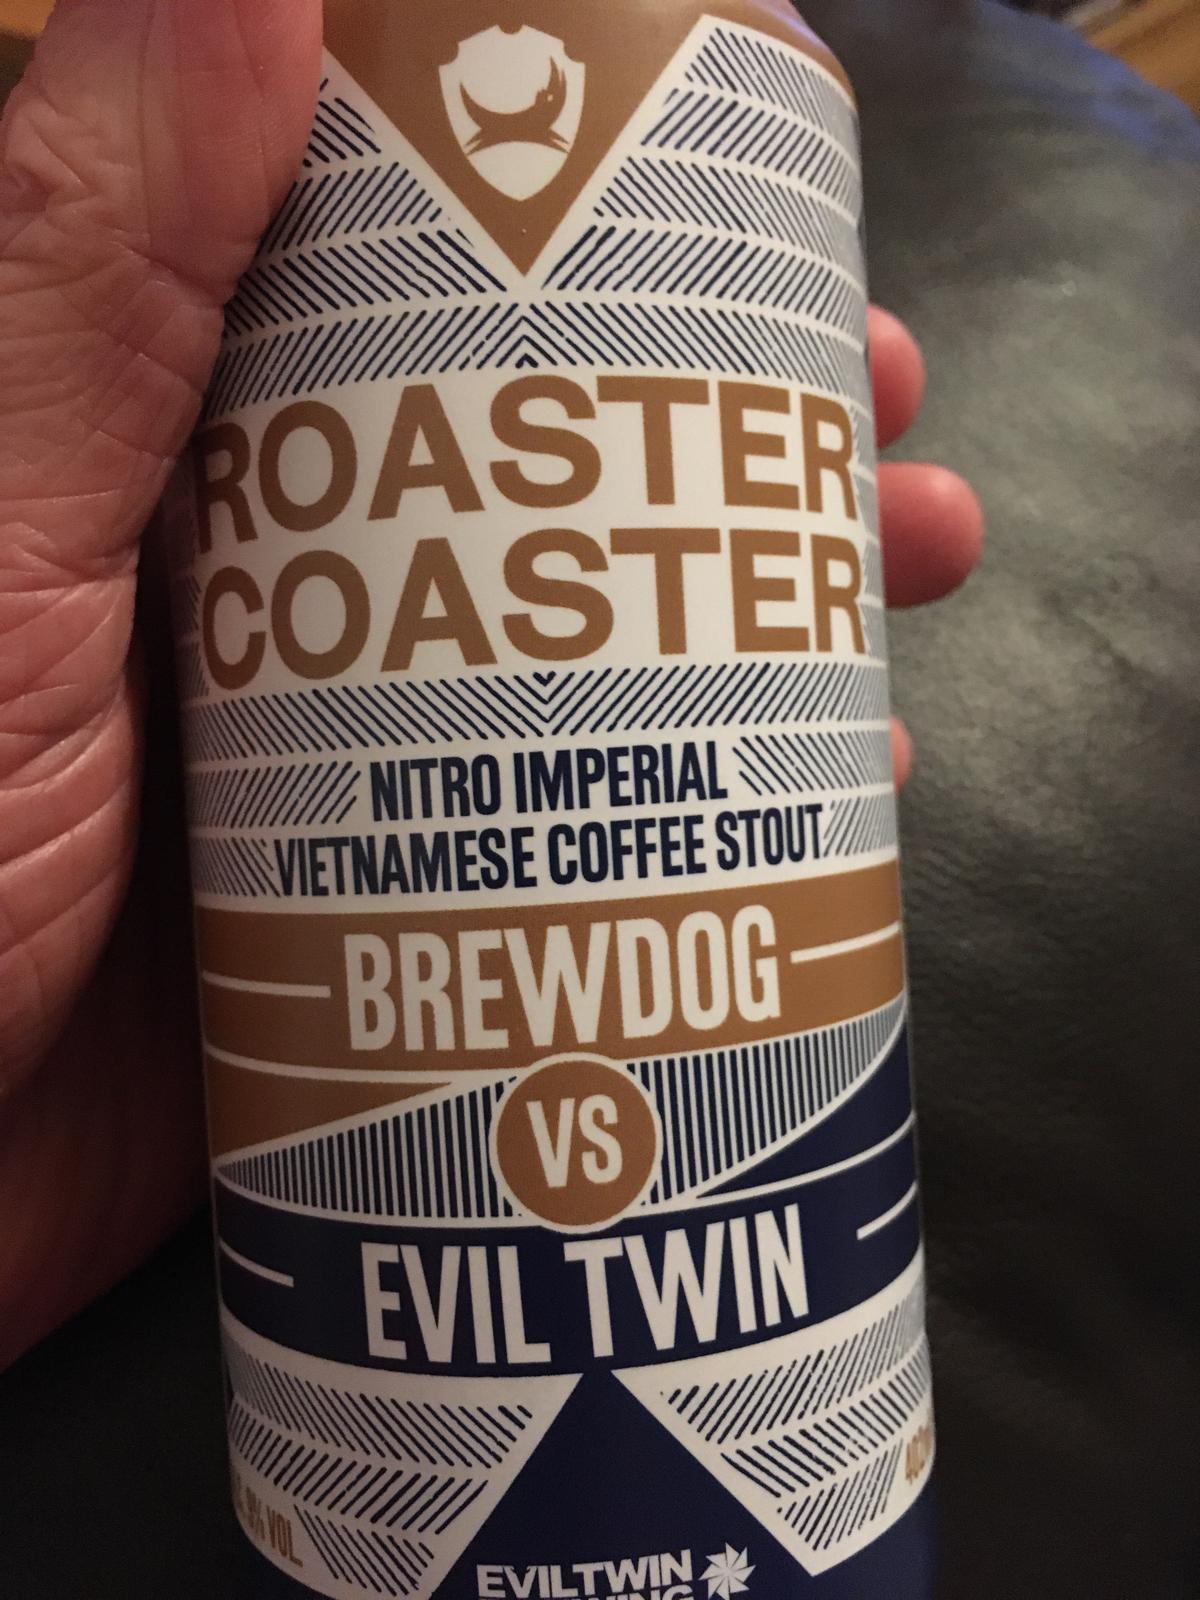 Roaster Coaster (Collaboration with Evil Twin)